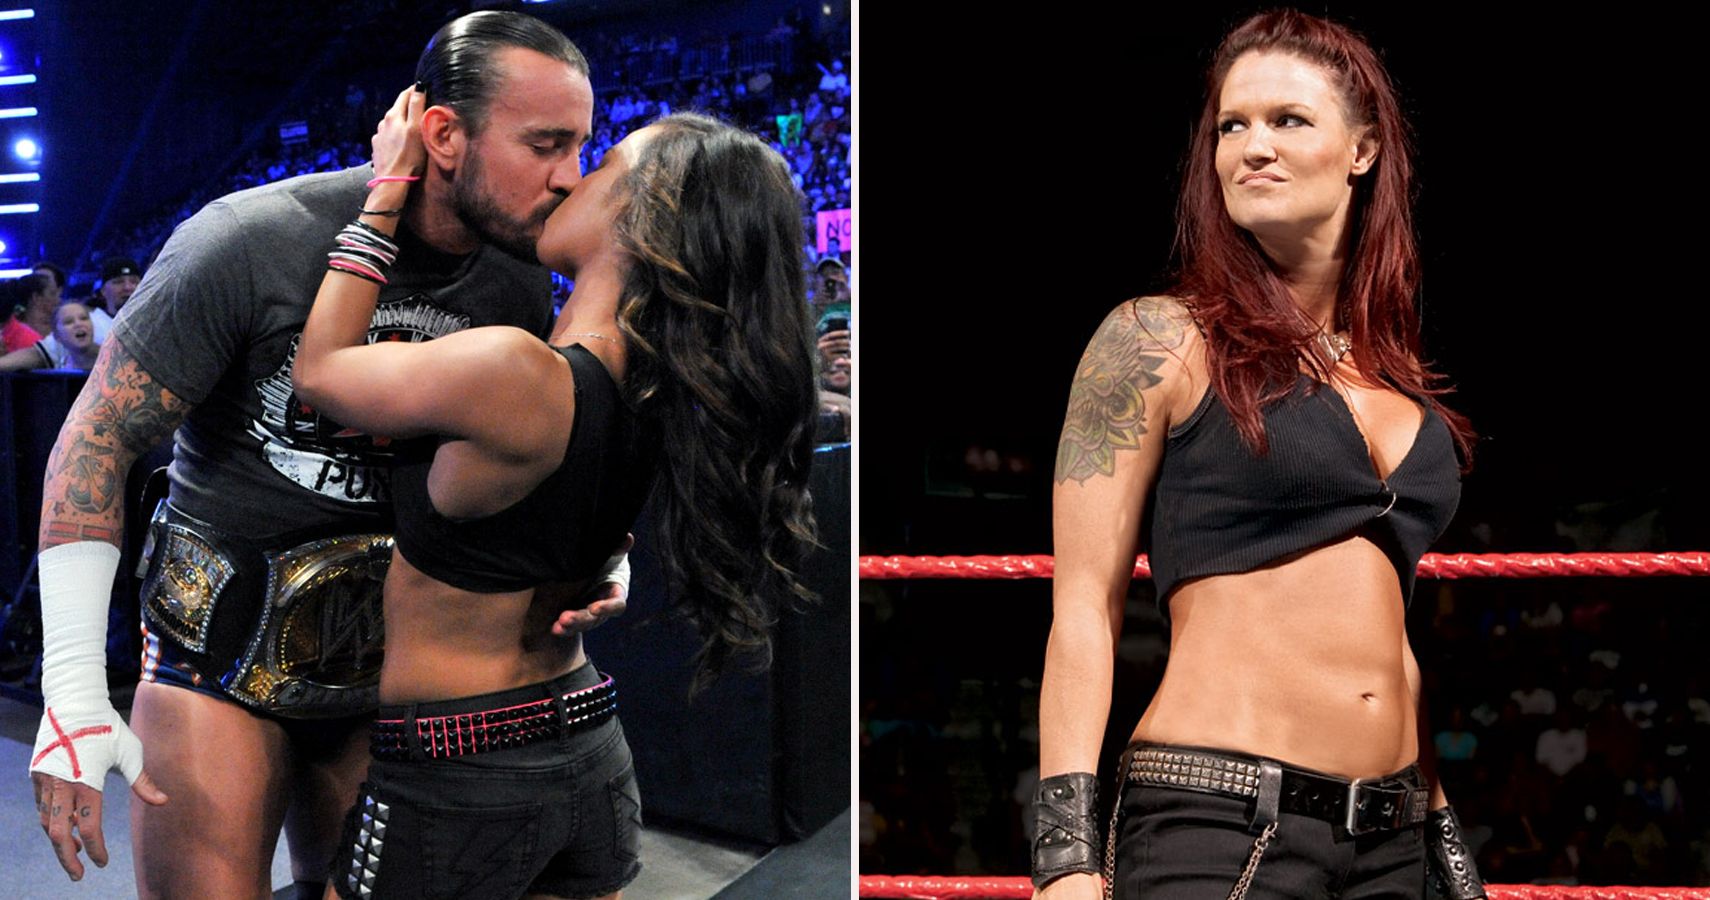 Stephanie Fuck Wwe - 15 Things You Didn't Know About Lita's Past Relationships